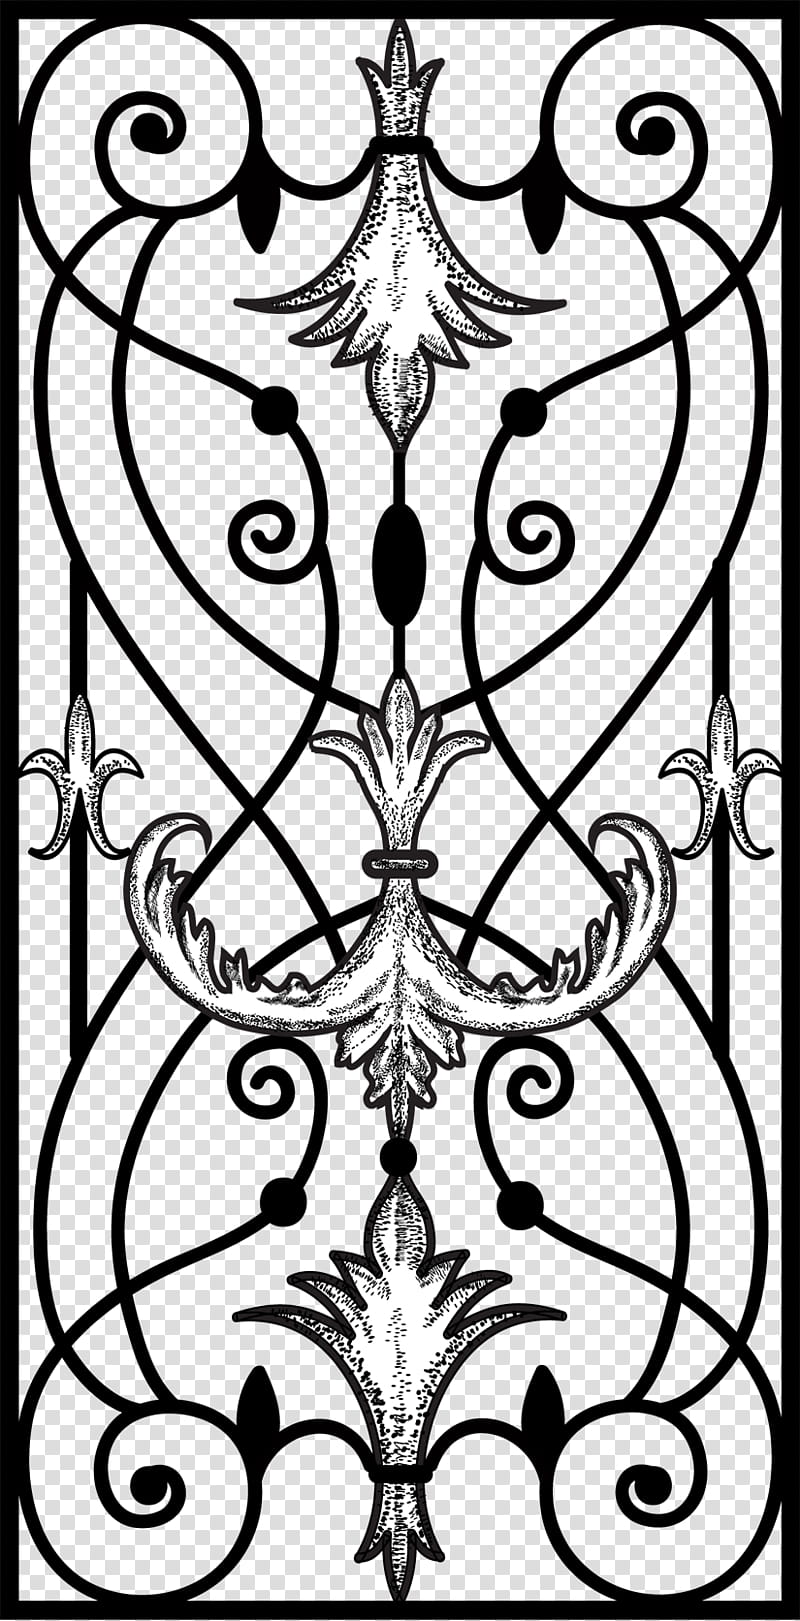 Castle Window, black and white grille wall decor transparent background PNG clipart